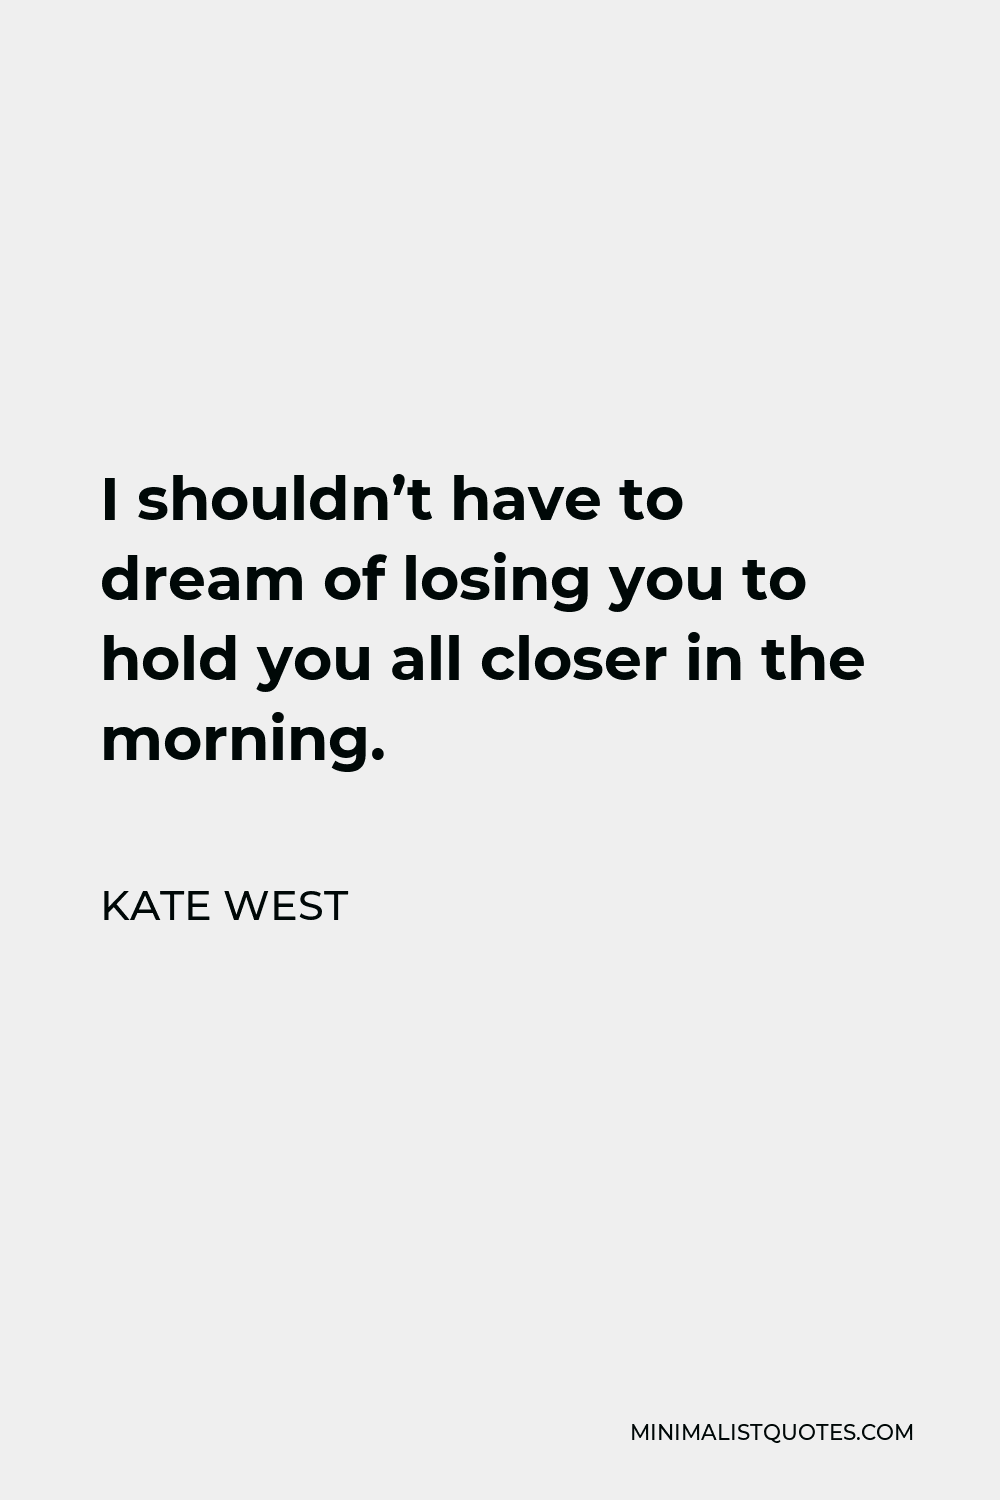 Kate West Quote - I shouldn’t have to dream of losing you to hold you all closer in the morning.